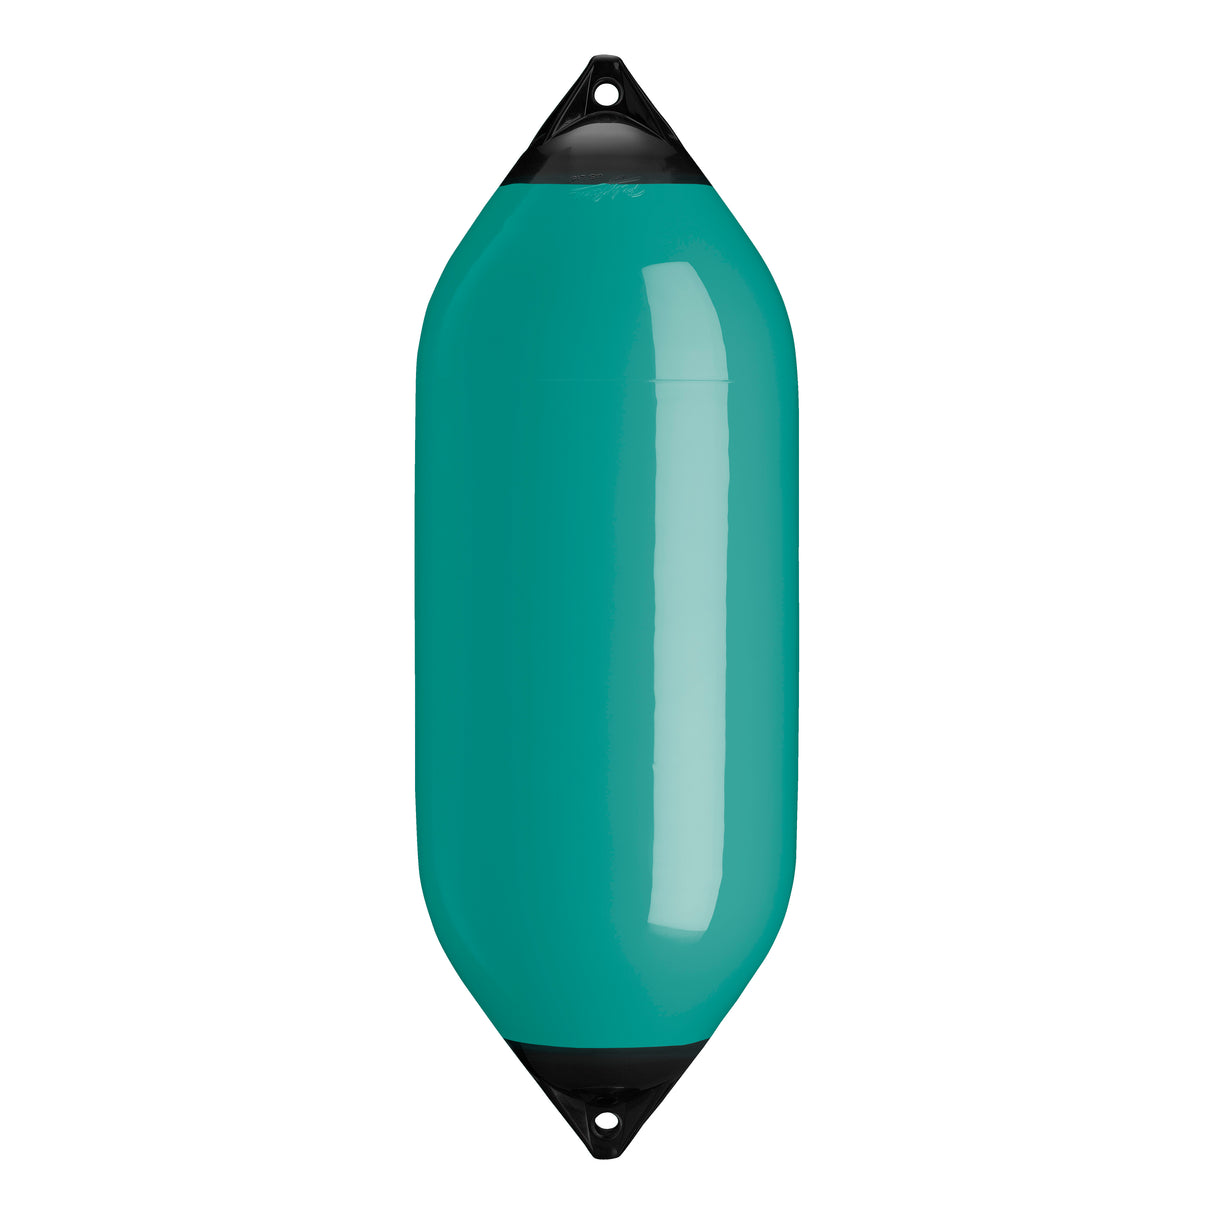 Teal boat fender with Navy-Top, Polyform F-10